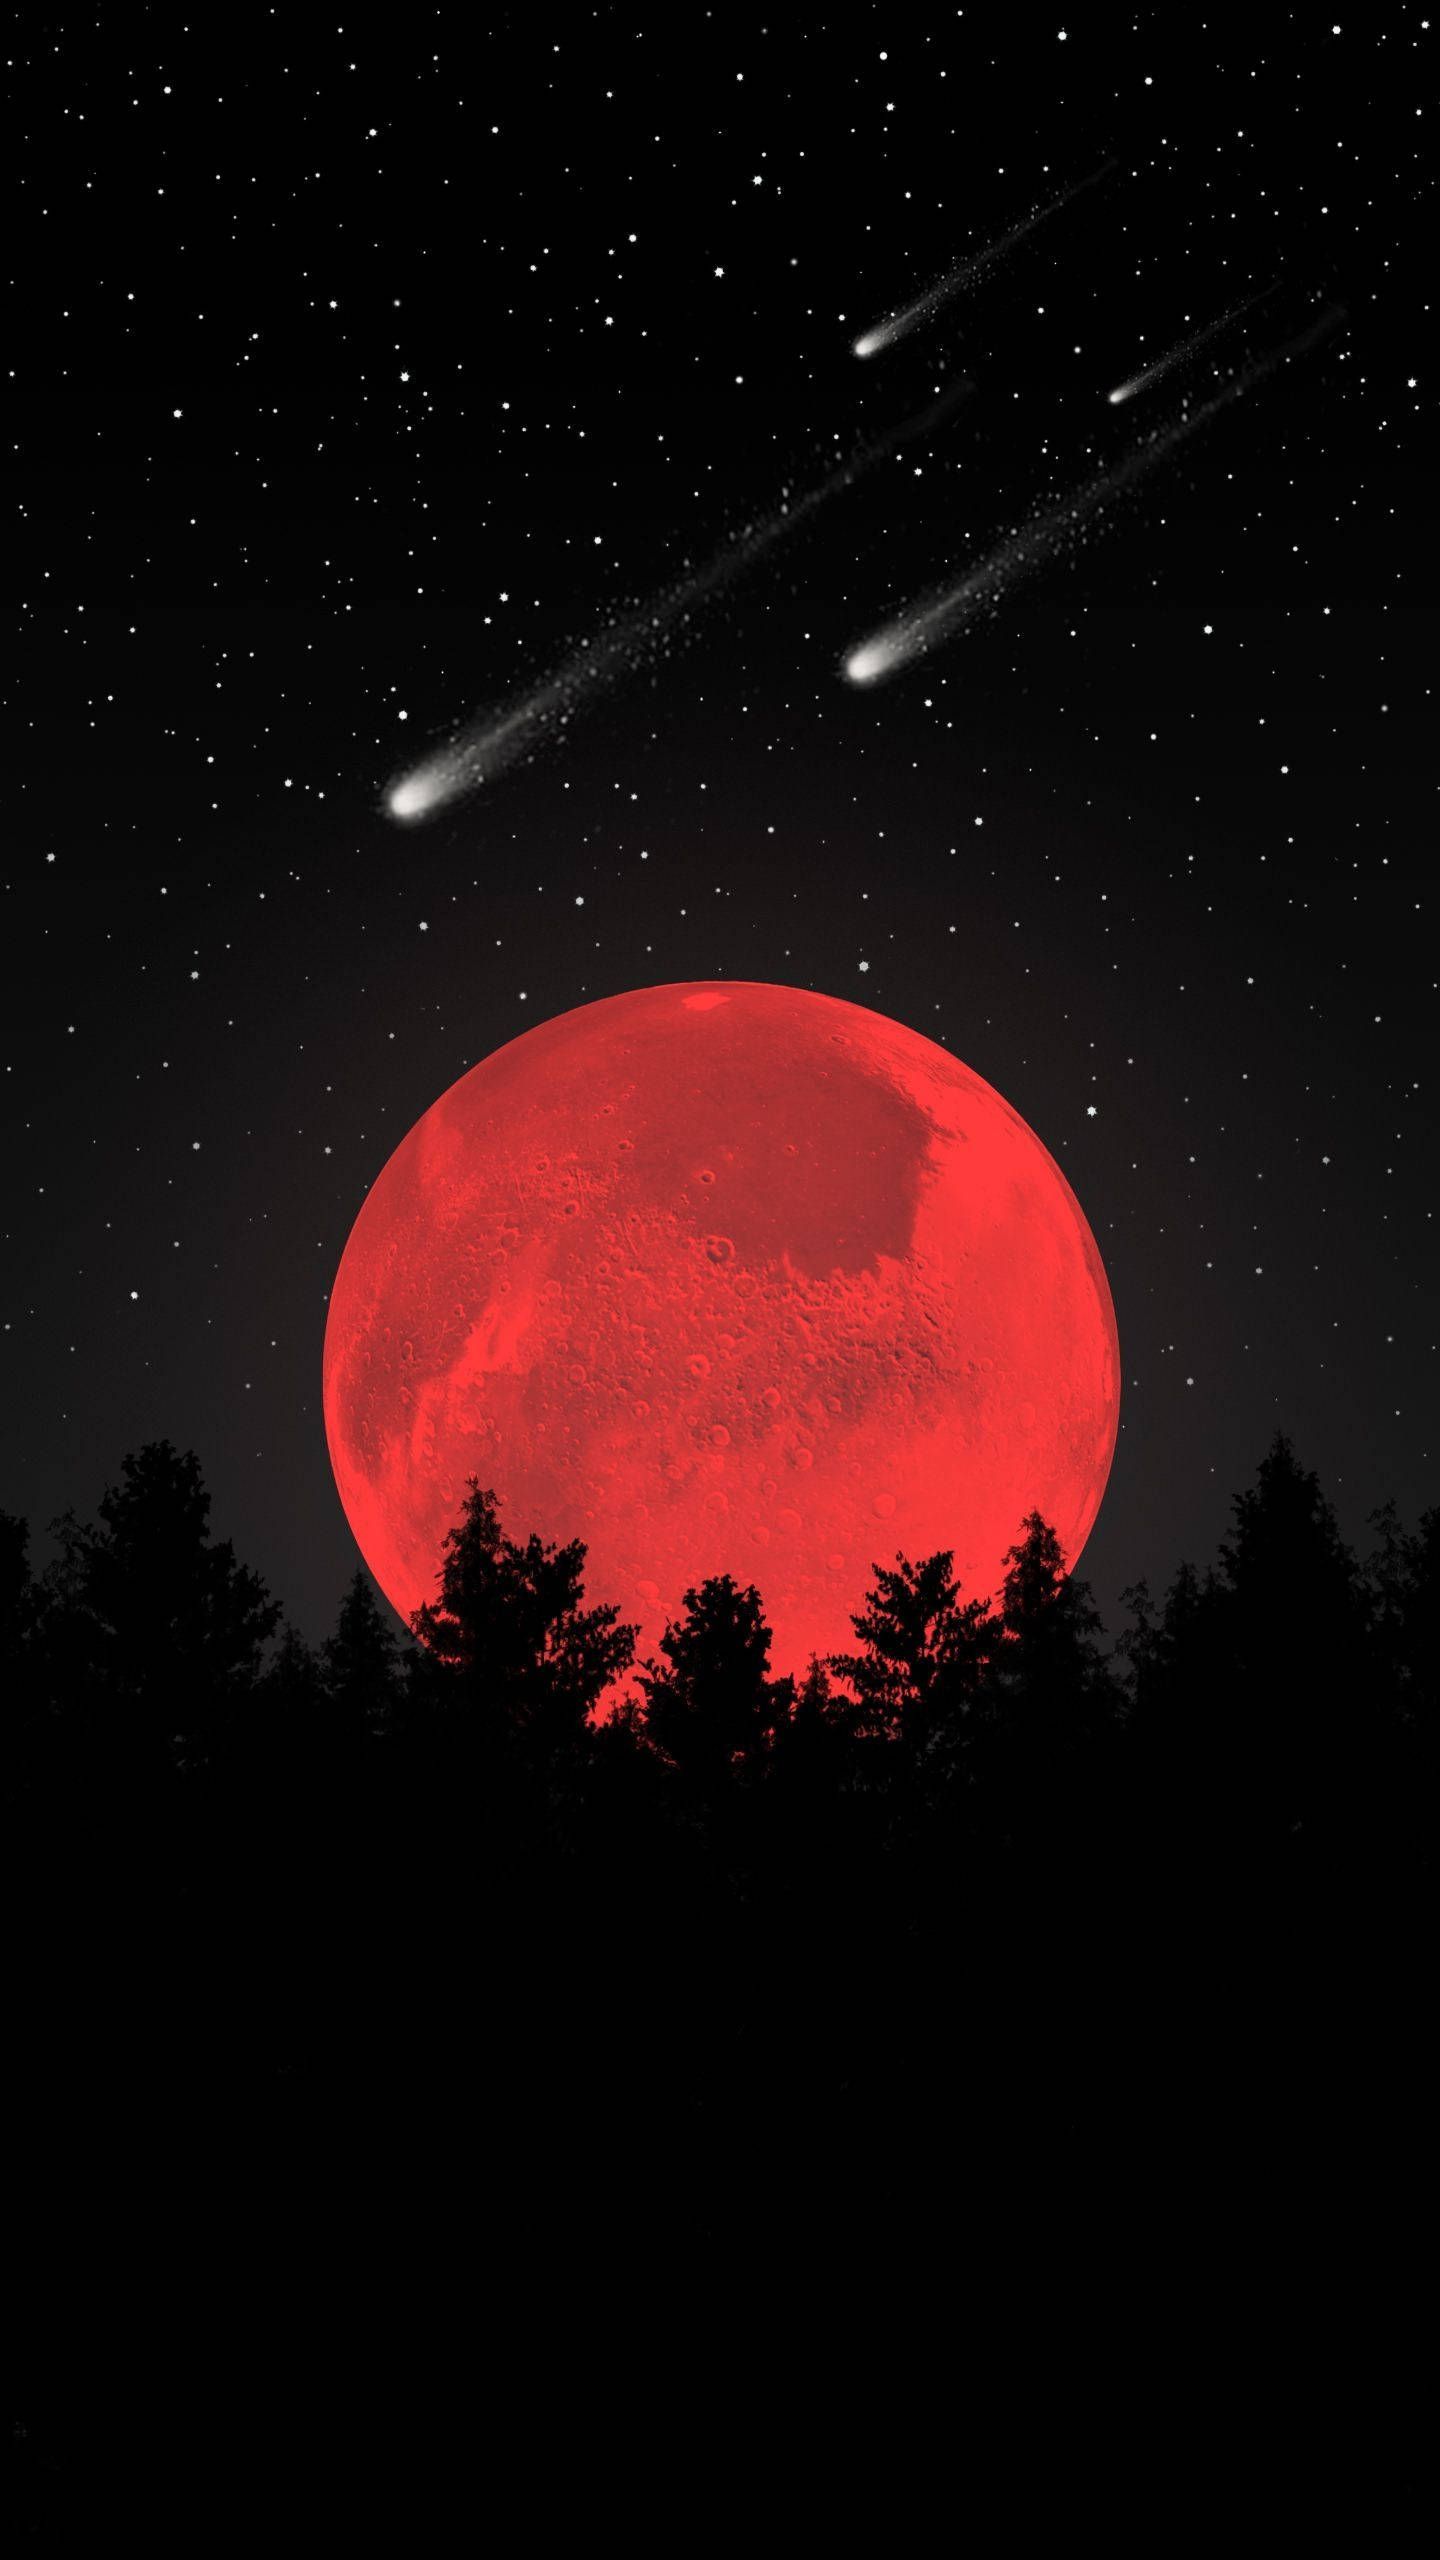 A red moon with stars and trees in the background - Moon